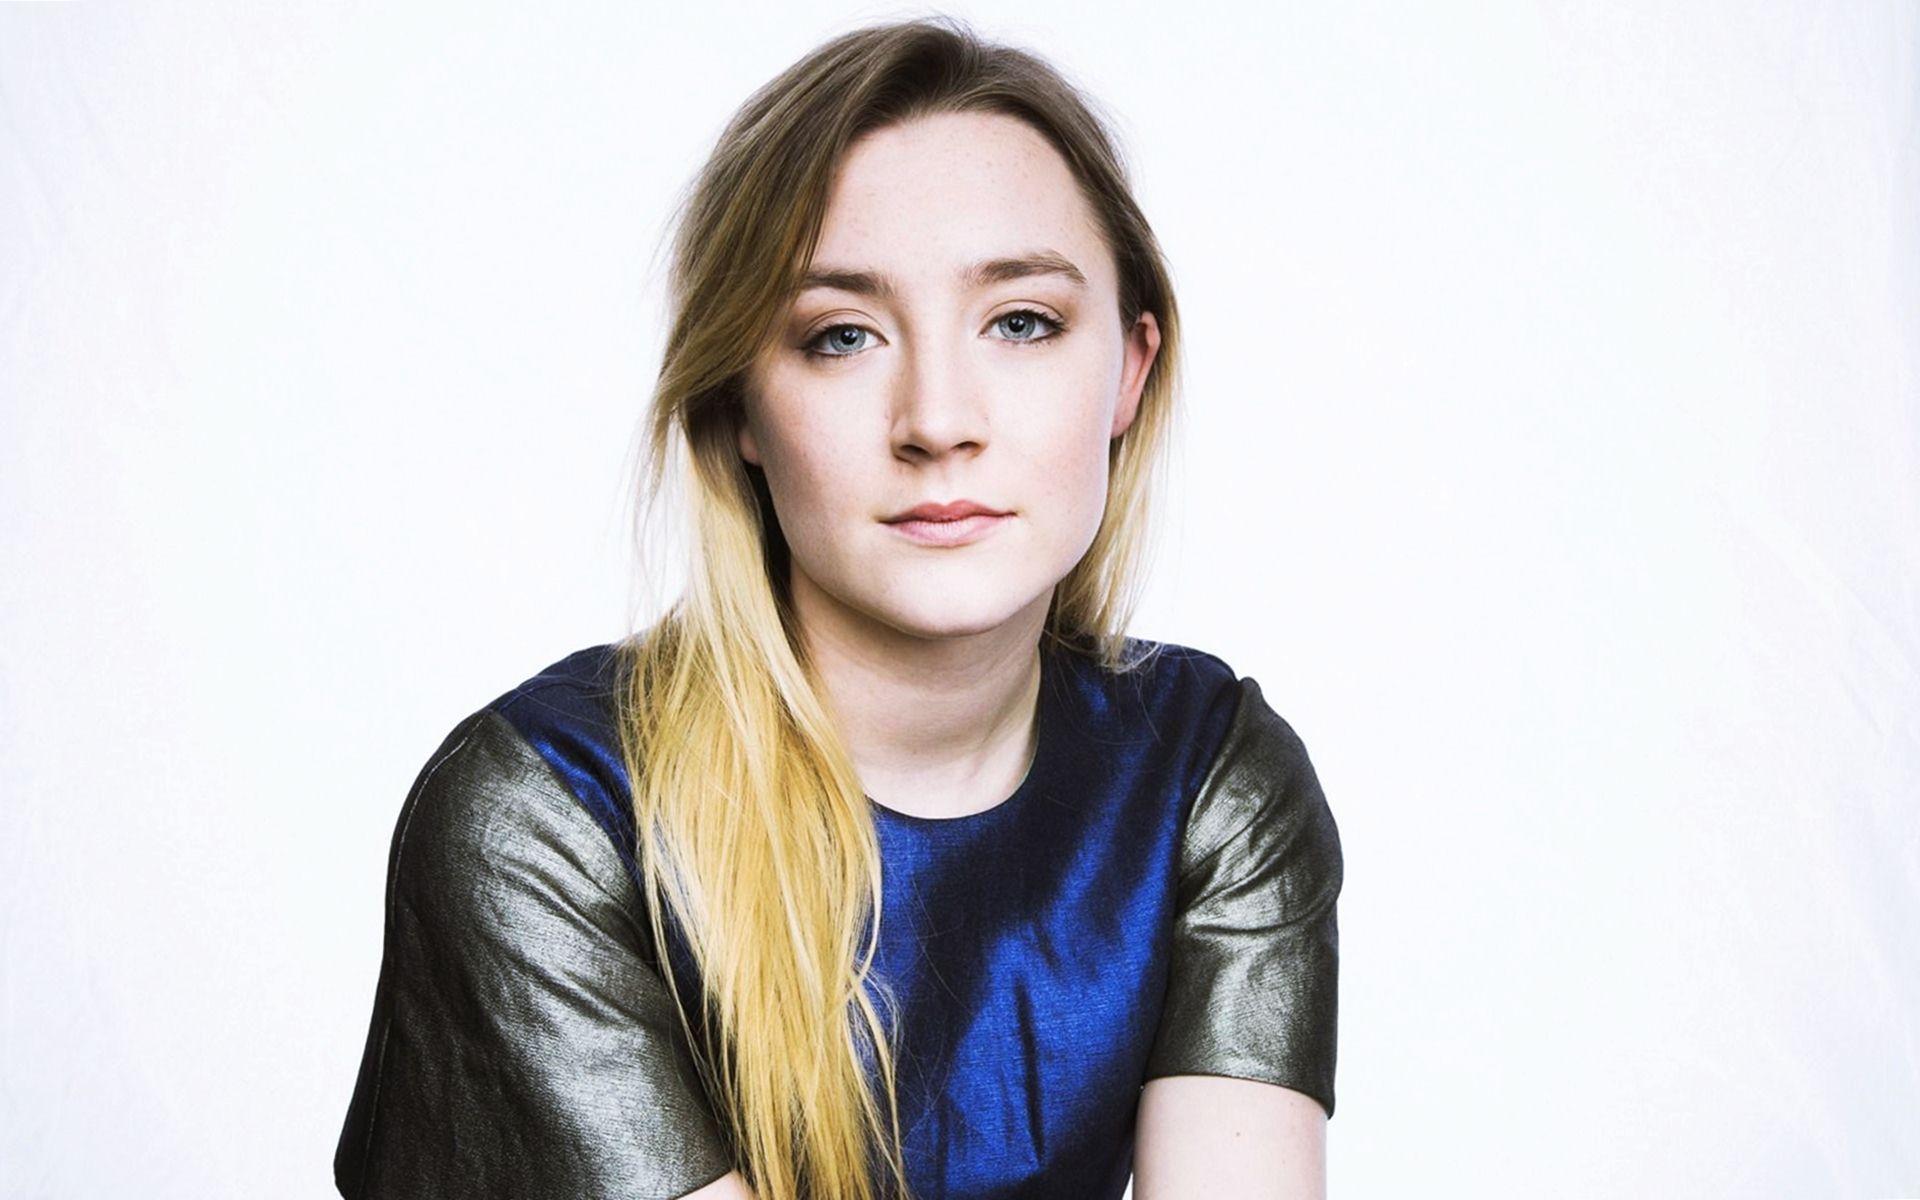 Saoirse Ronan Wallpaper Image Photo Picture Background